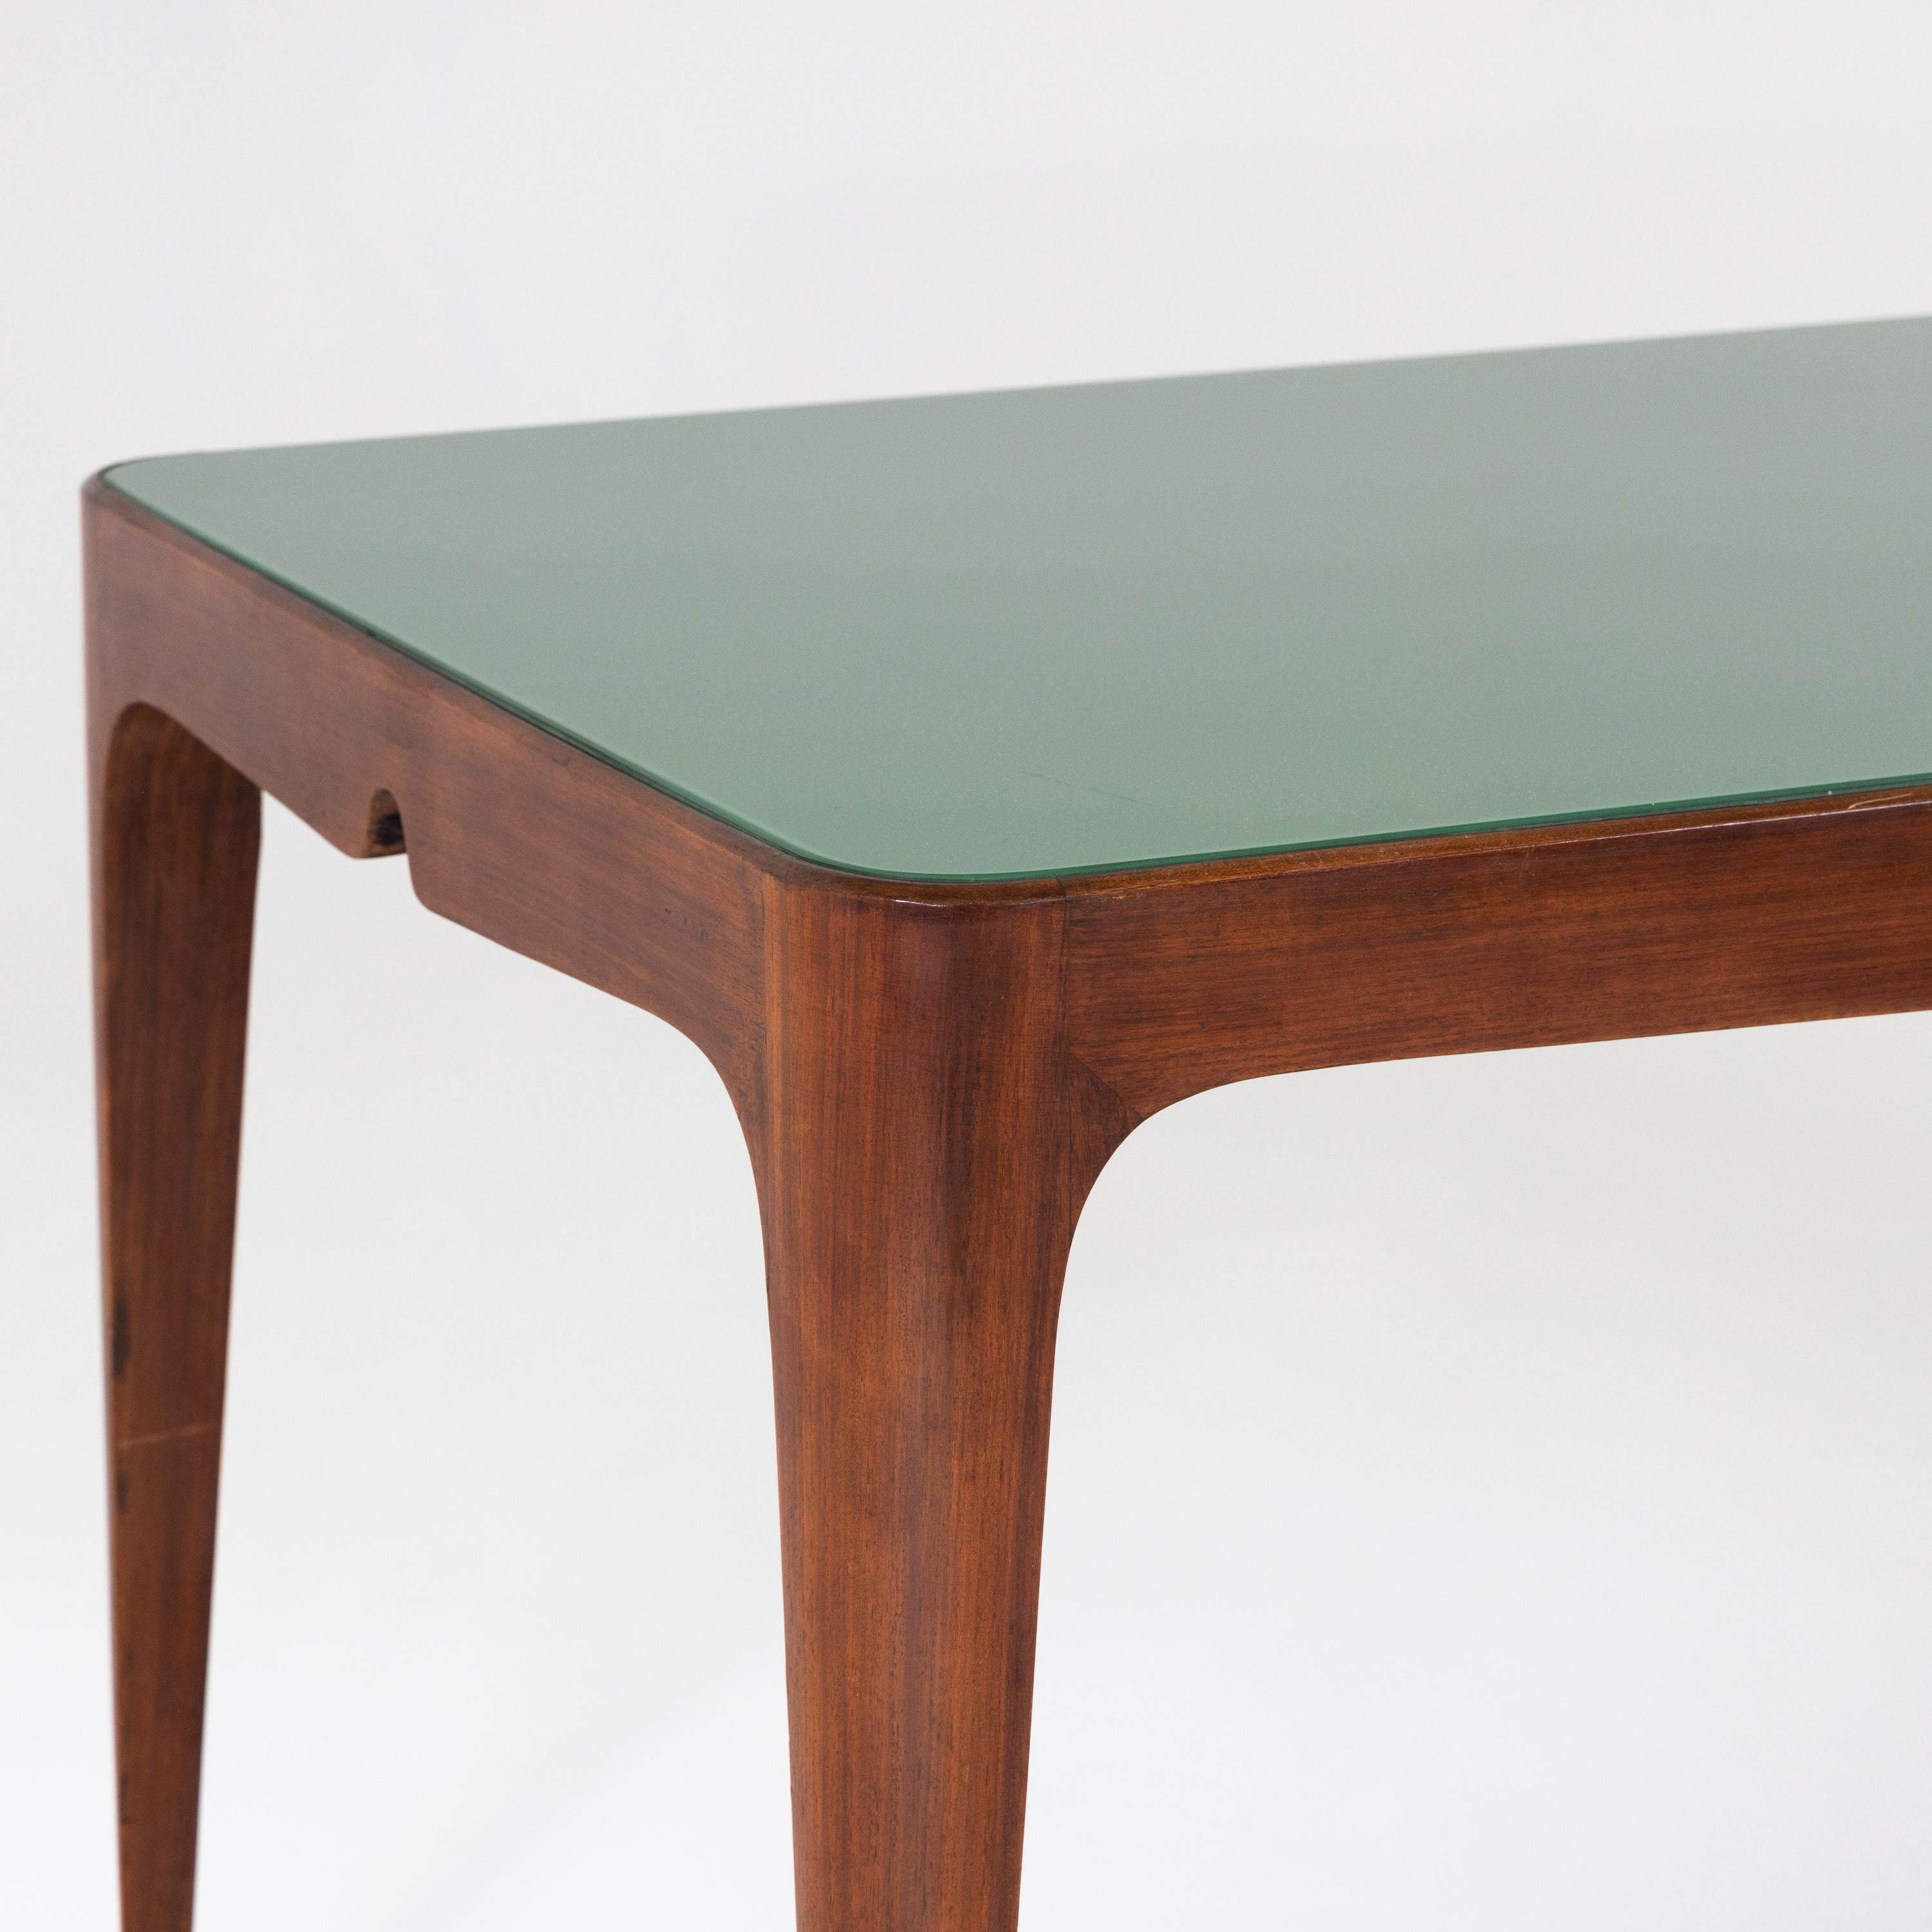 Italian Large Dining Table with Glass Top, Italy, Mid-20th Century